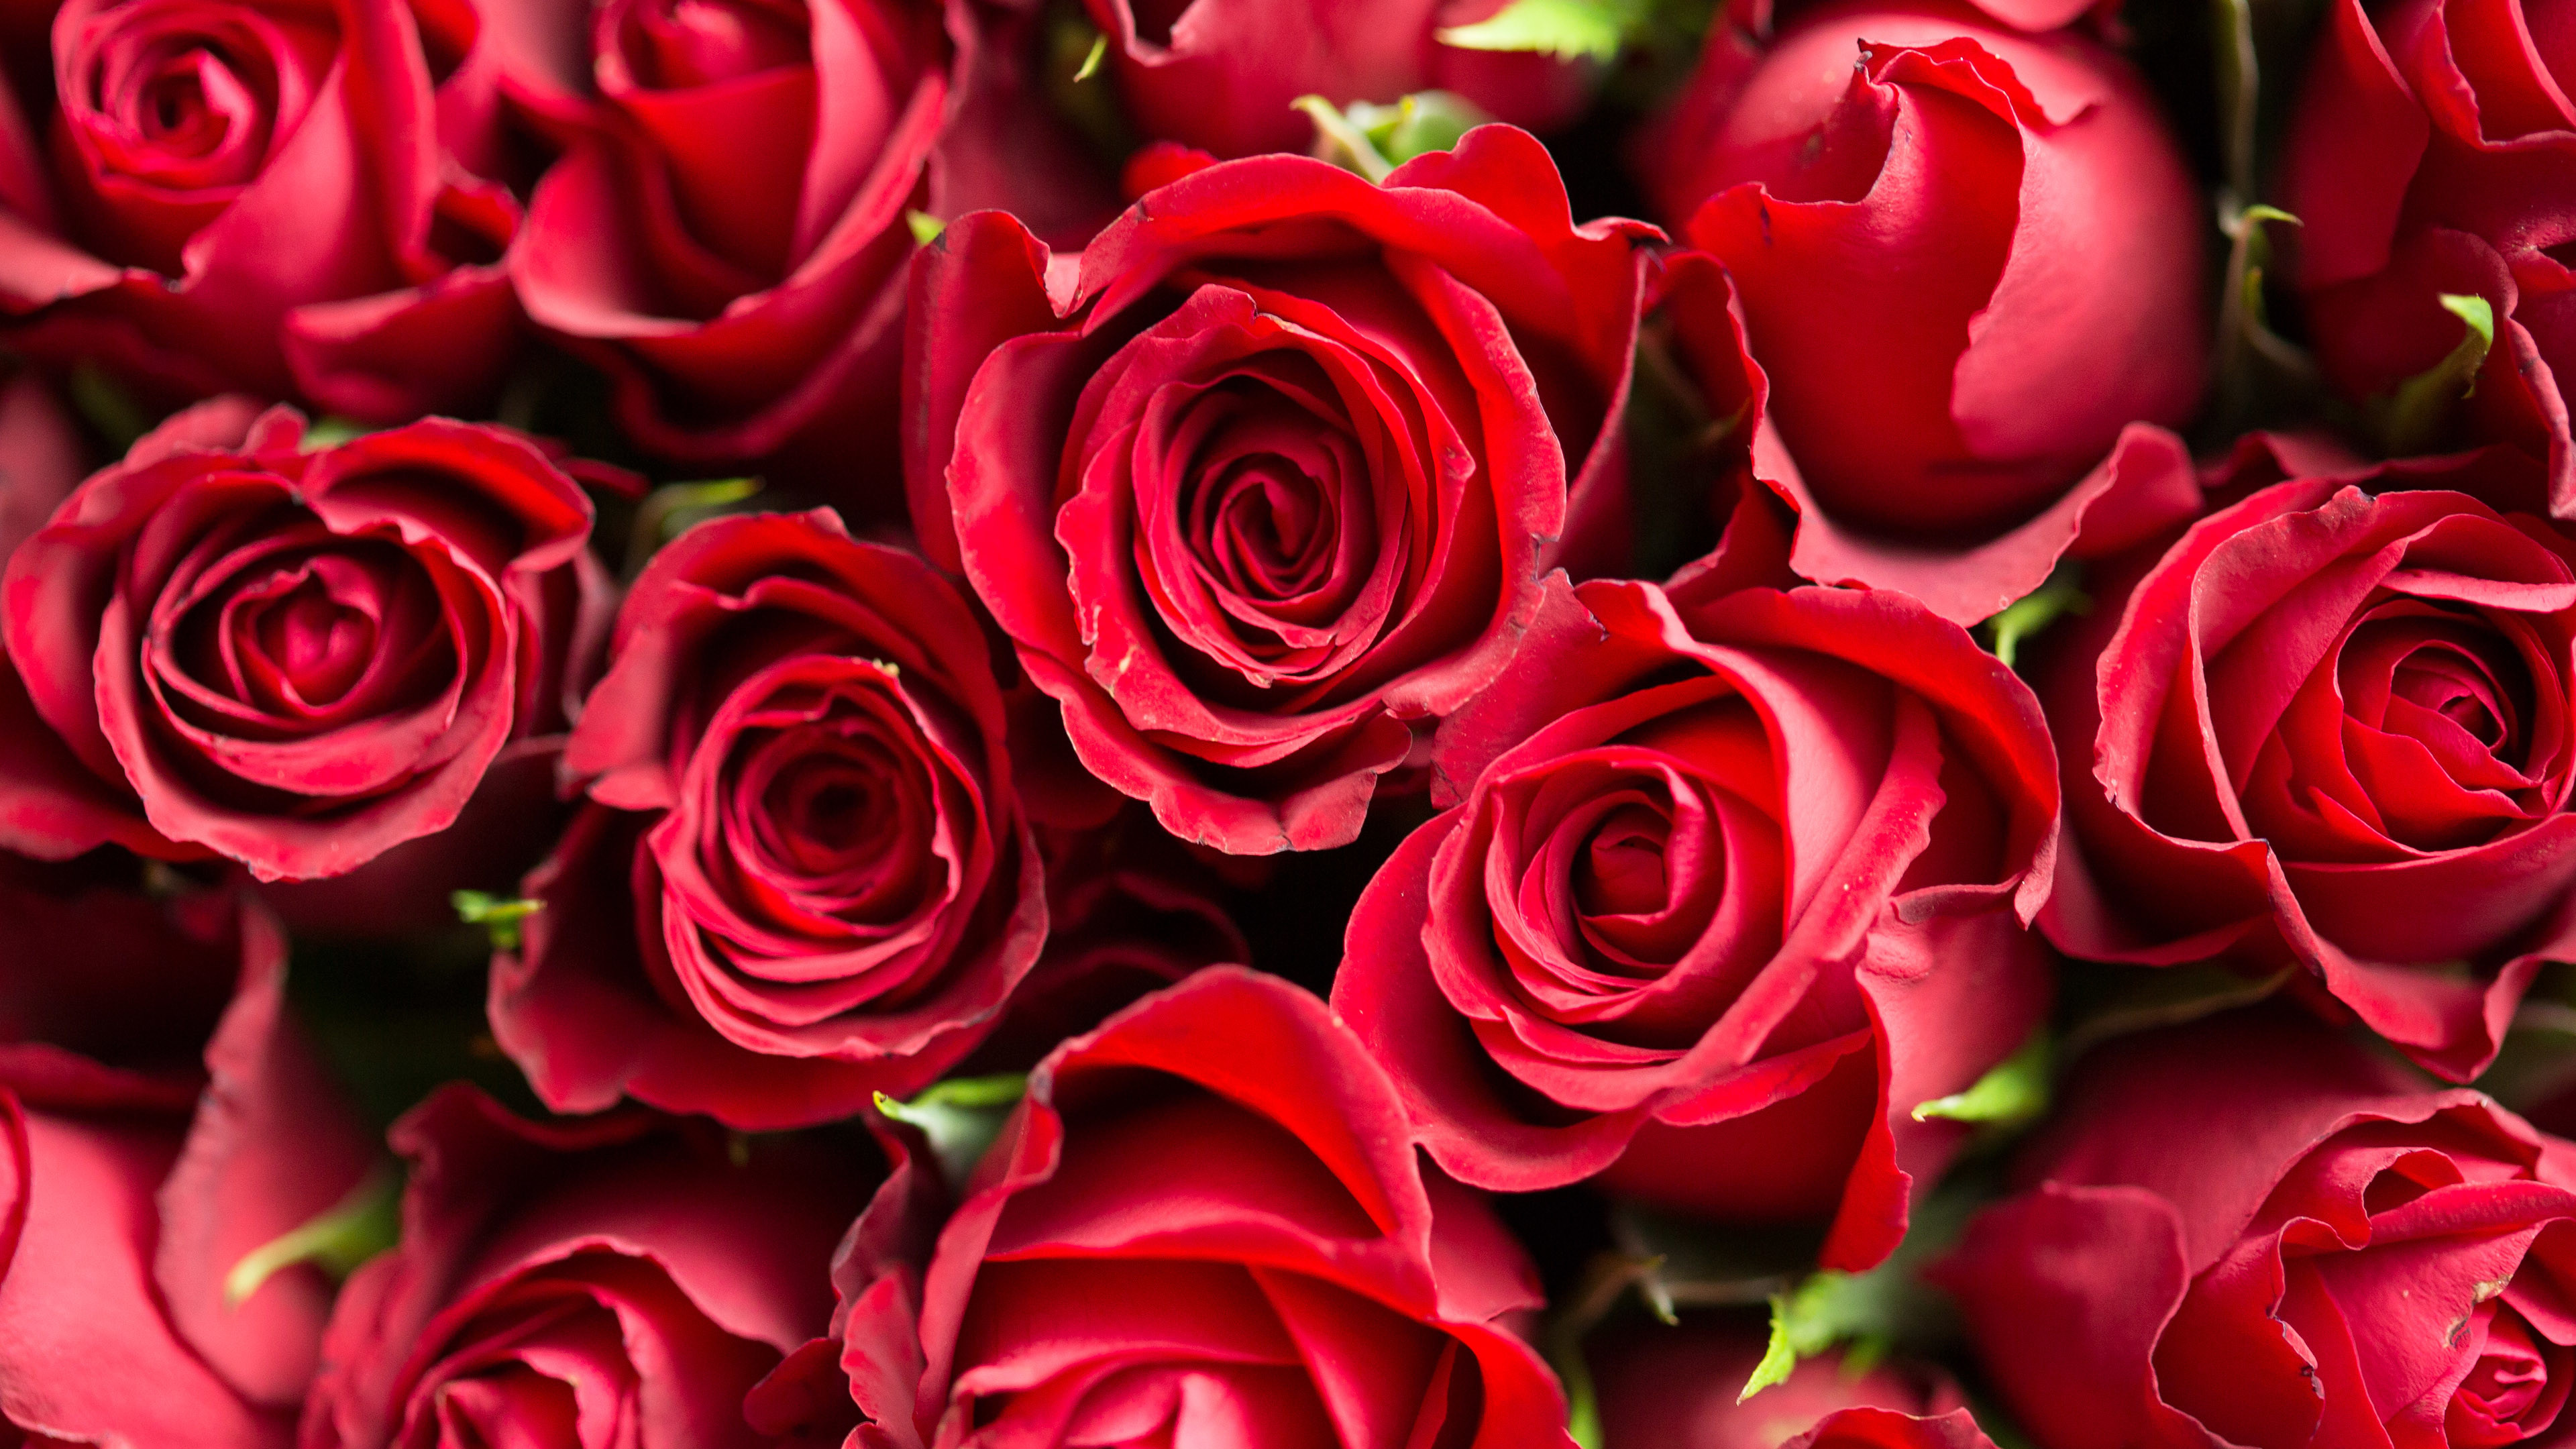 3840x2160 ... 4K Background with Pictures of Red Roses Flower